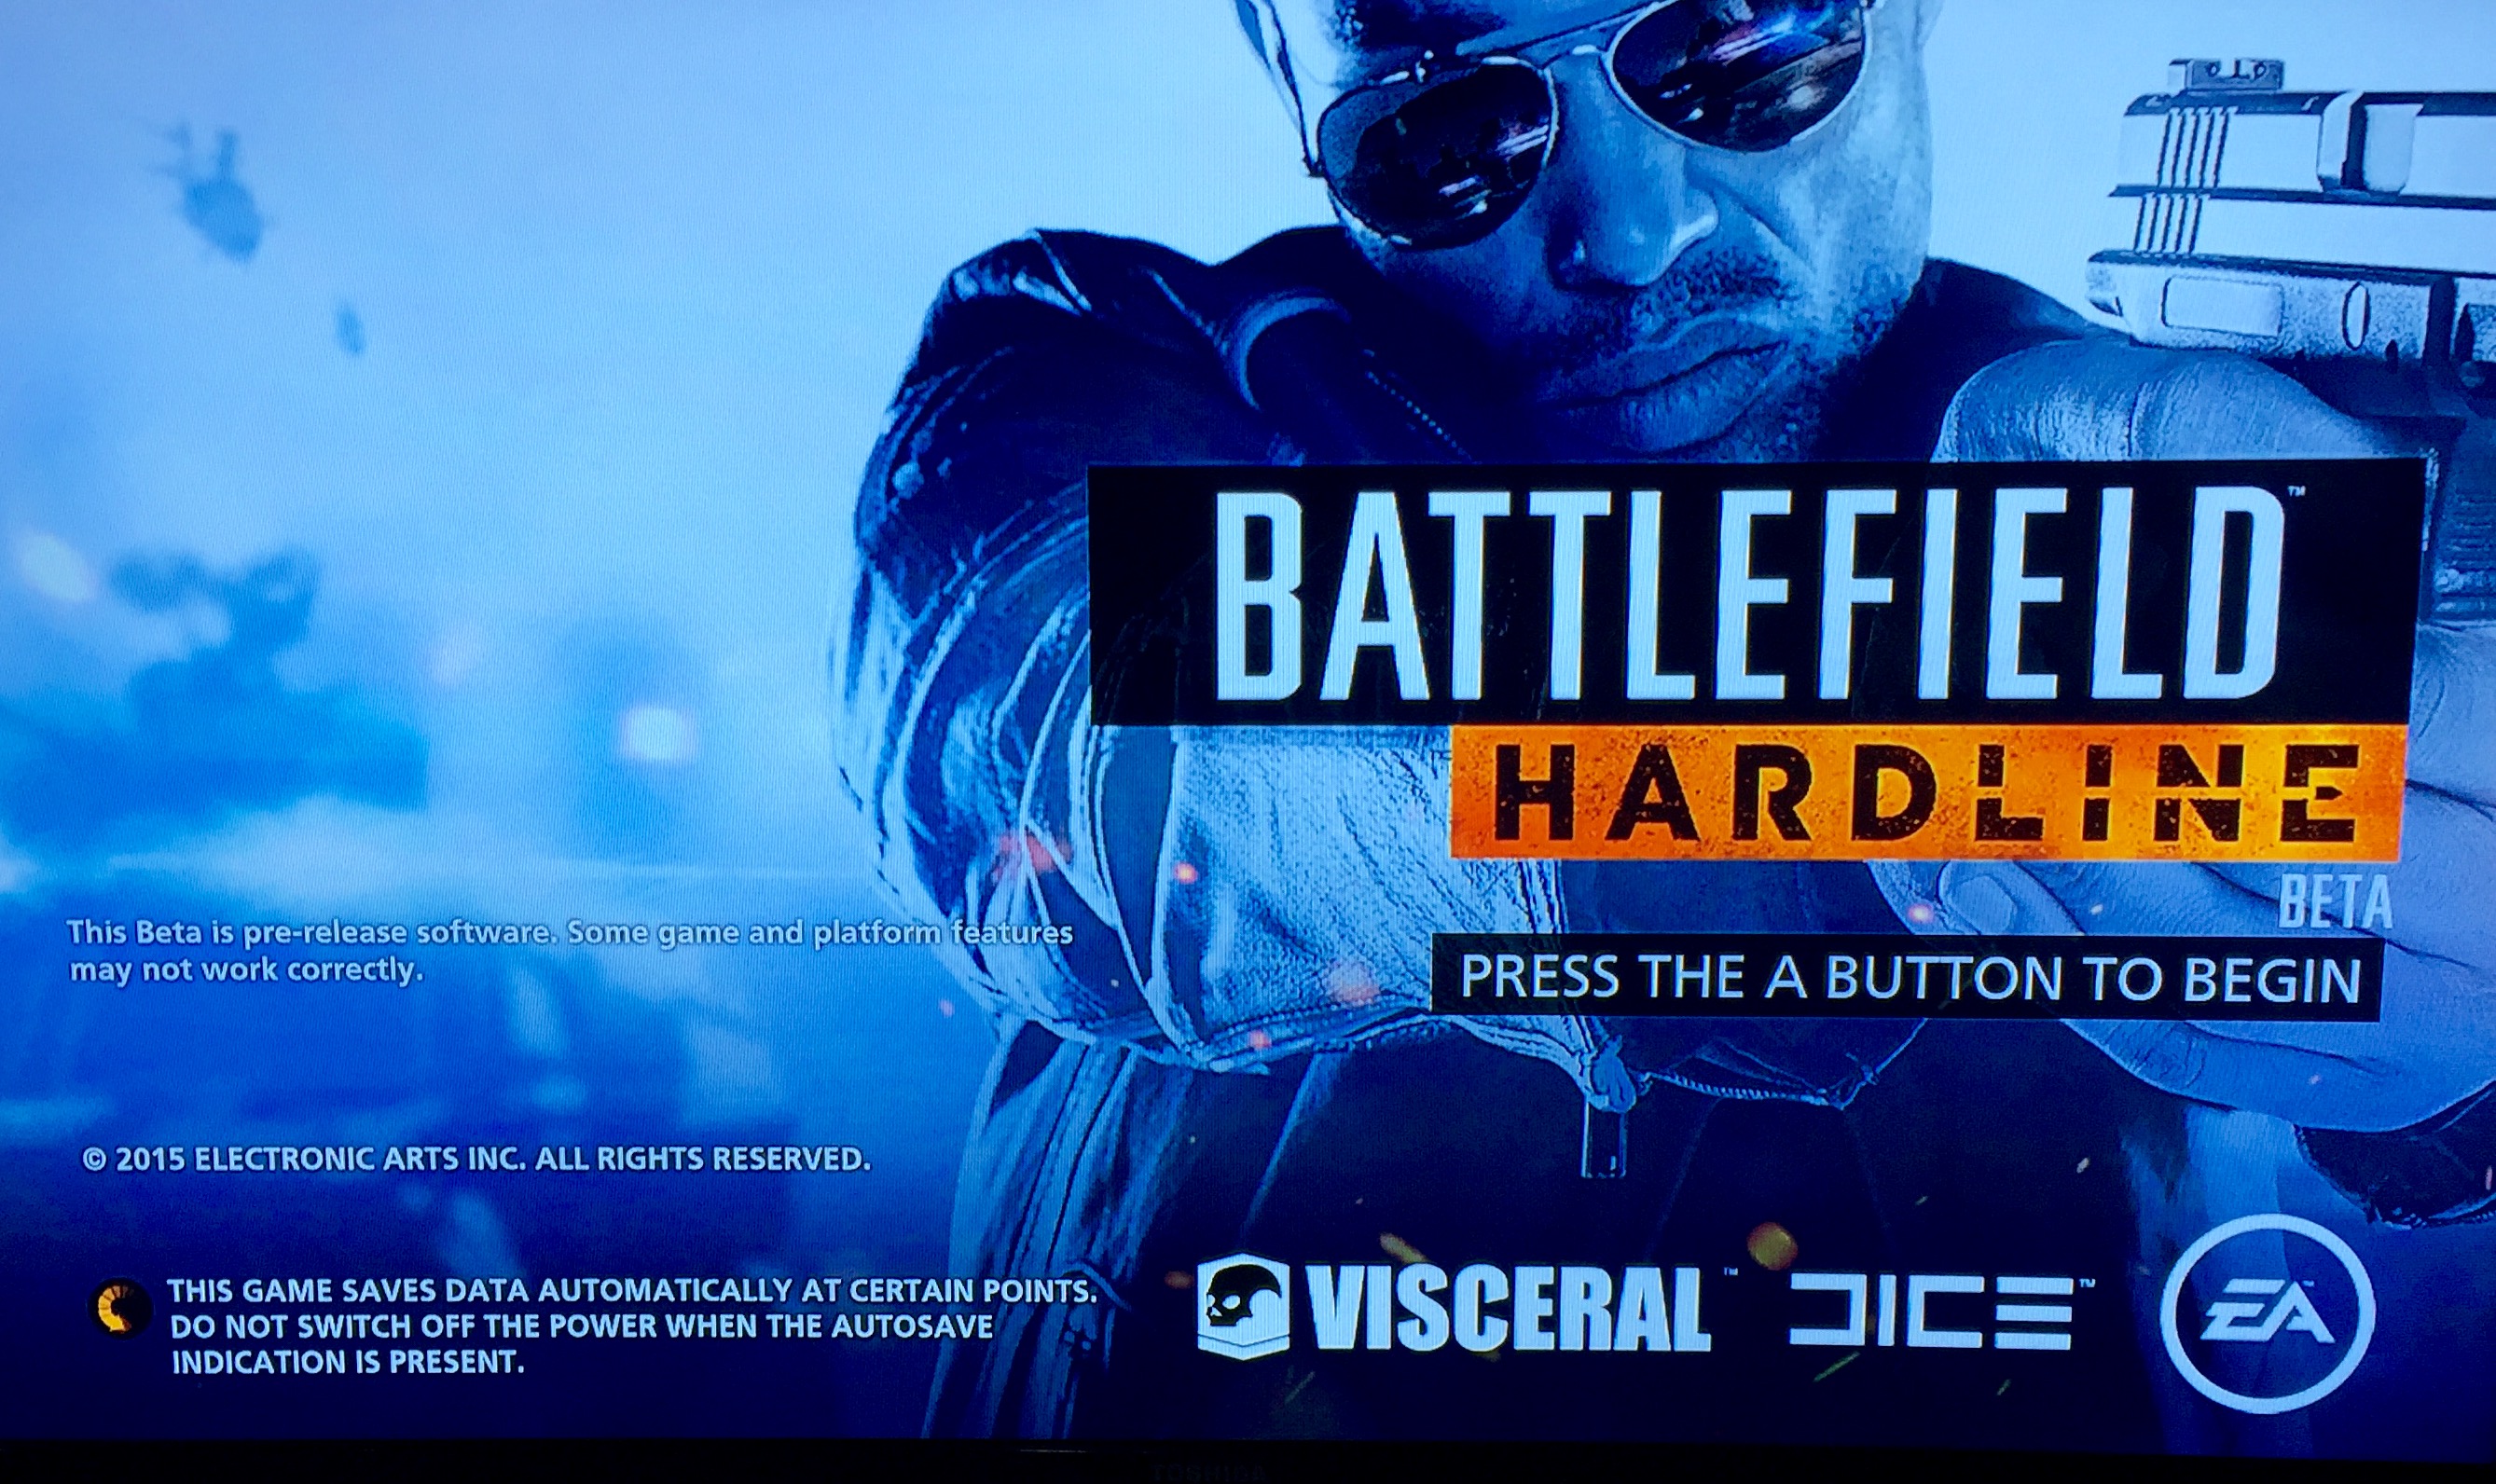 Make use of the short Battlefield Hardline beta with these tips.